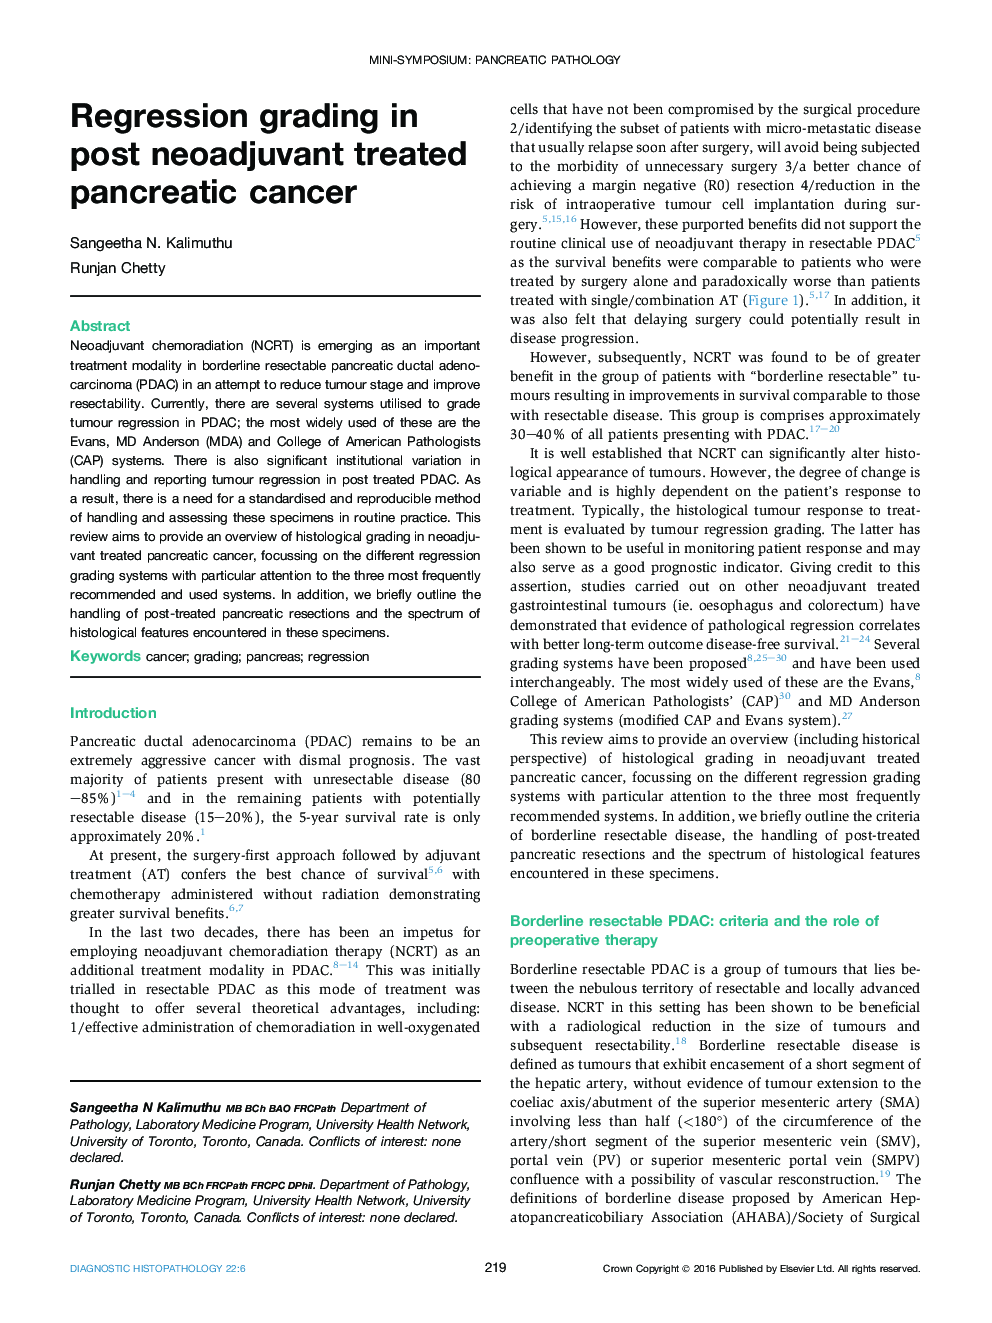 Regression grading in post neoadjuvant treated pancreatic cancer